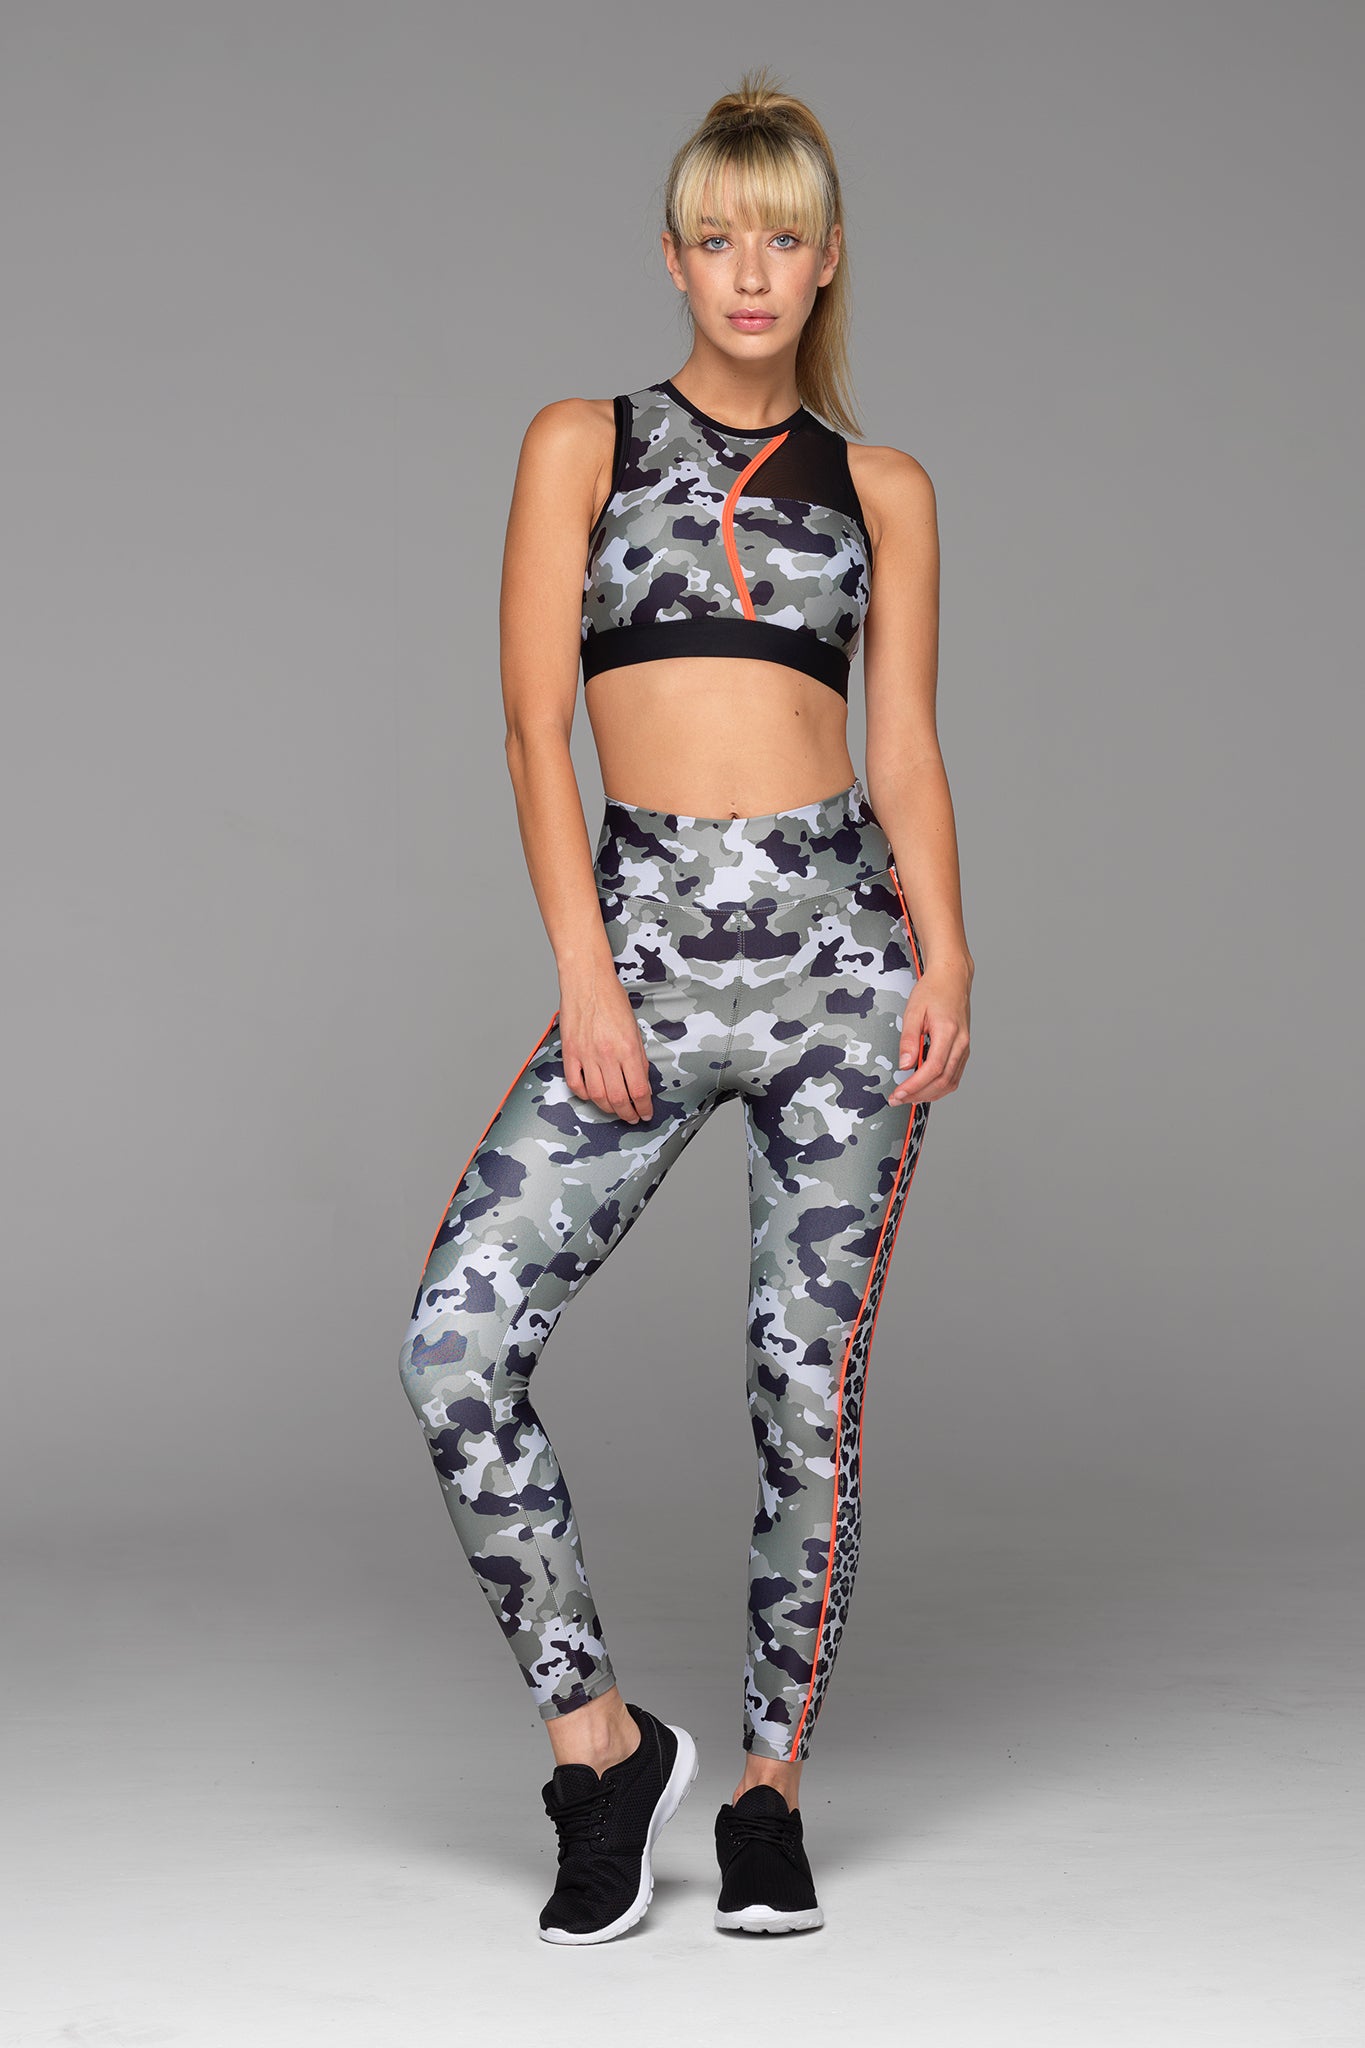 Our Charlie 7/8 Length Legging in Camo is ready for your next adventure. With its two-toned print and touch of vibrant orange, you won't be missed.